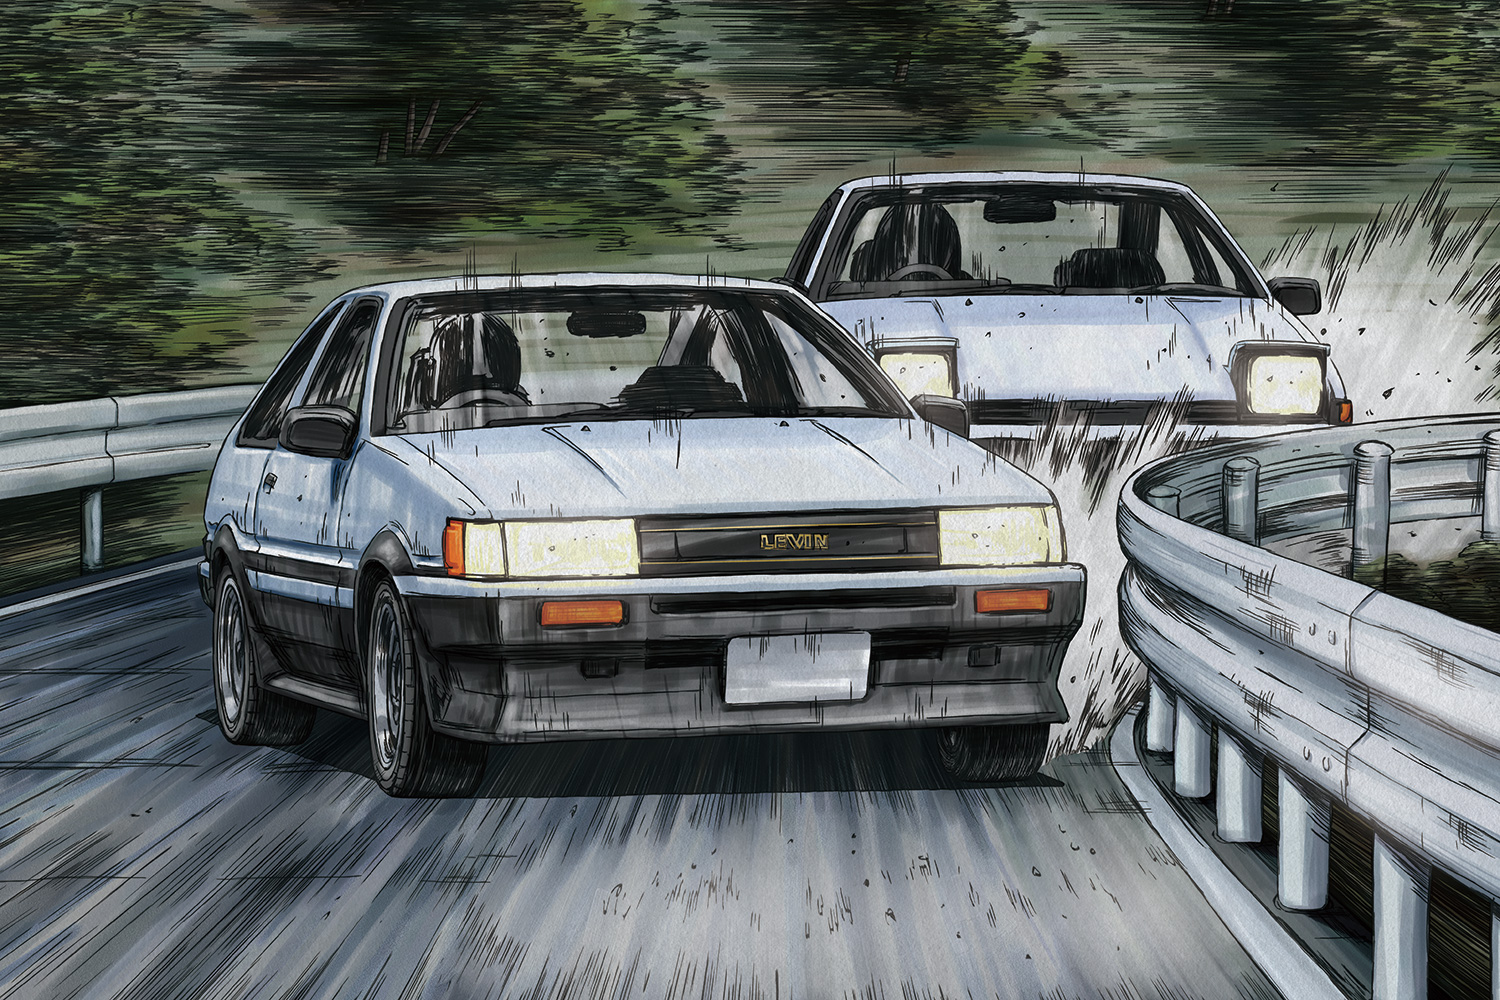 298 Ae86 Images Stock Photos  Vectors  Shutterstock